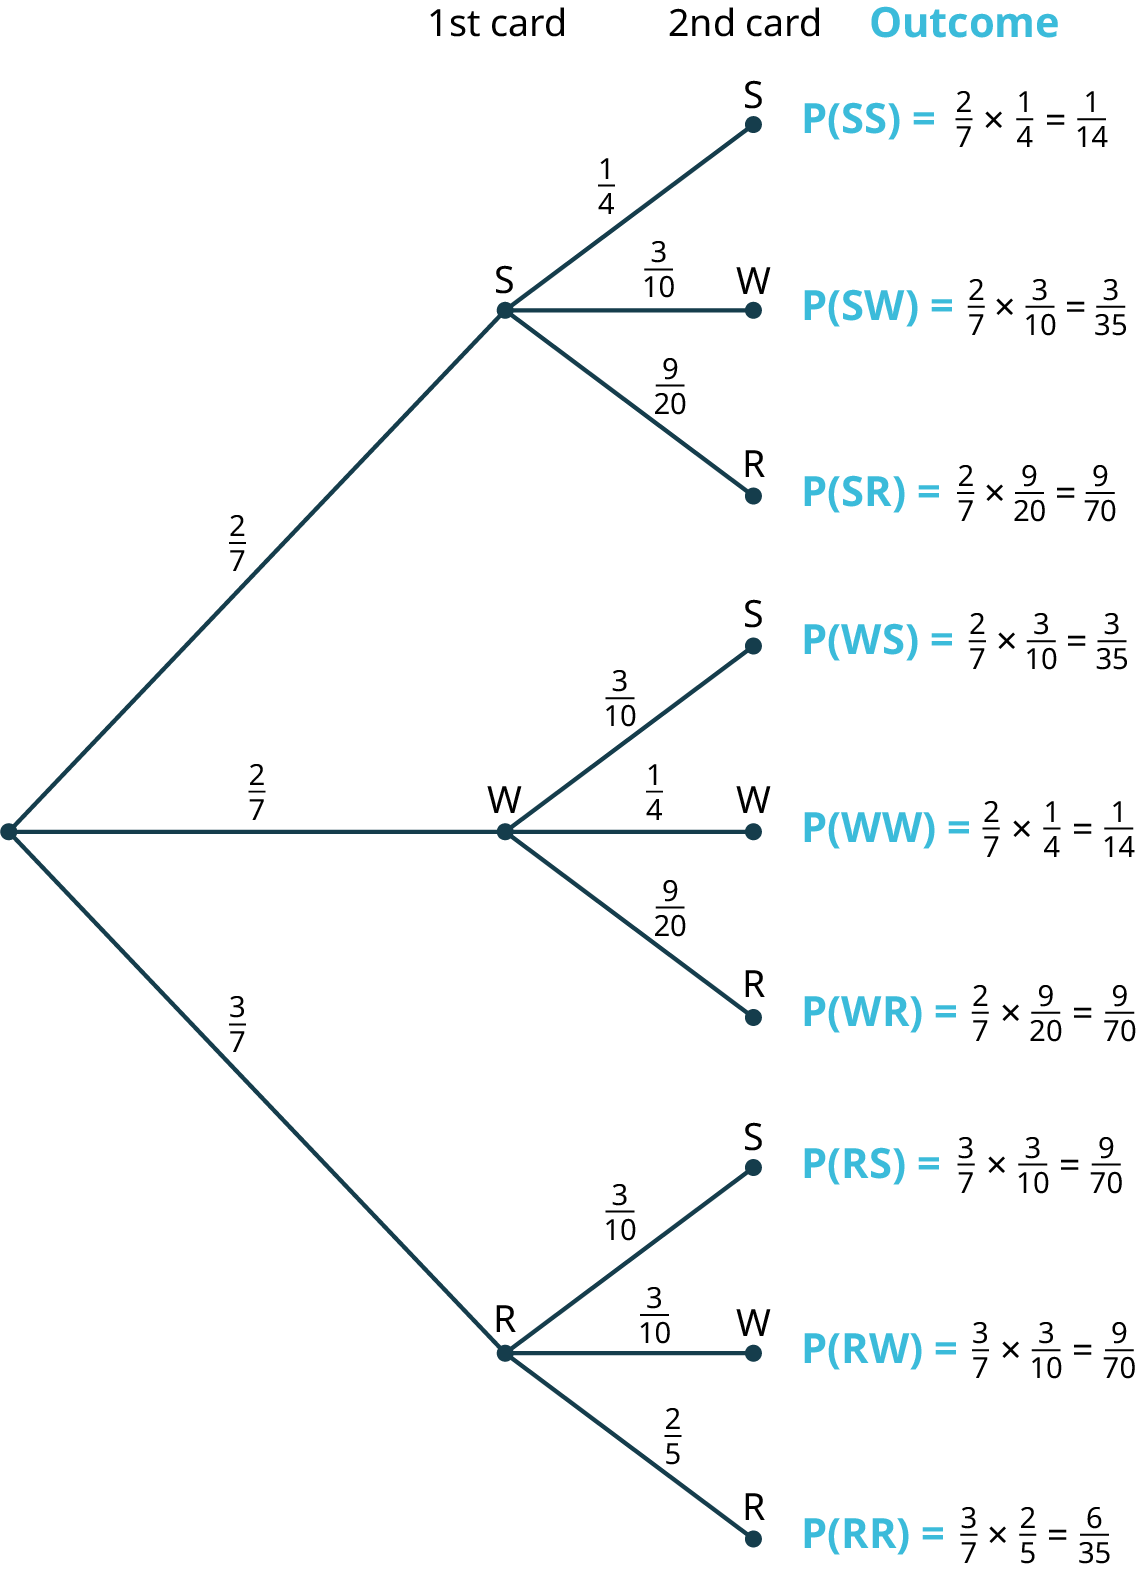 A tree diagram with three stages. The diagram shows a node in the first stage branching into three nodes labeled S, W, and R in the second stage with the probabilities two-sevenths, two-sevenths, and three-sevenths, respectively. The second stage represents the first card. The third stage representing the second card is as follows. Node, S branches into three nodes labeled S, W, and R with the probabilities, one-fourth, three-tenths, and nine-twentieths. Node, W branches into three nodes labeled S, W, and R with the probabilities three-tenths, one-fourth, and nine-twentieths. The node, R branches into three nodes labeled S, W, and R with the probabilities three-tenths, three-tenths, and two-fifths. The possible outcomes are as follows: S S, S W, S R, W S, W W, W R, R S, R W, and R R. The probabilities for the outcomes are as follows. P of S S equals 2 over 7 times 1 over 4 equals 1 over 14. P of S W equals 2 over 7 times 3 over 10 equals 3 over 35. P of S R equals 2 over 7 times 9 over 20 equals 9 over 70. P of W S equals 2 over 7 times 3 over 10 equals 3 over 35. P of W W equals 2 over 7 times 1 over 4 equals 1 over 14. P of W R equals 2 over 7 times 9 over 20 equals 9 over 70. P of R S equals 3 over 7 times 3 over 10 equals 9 over 70. P of R W equals 3 over 7 times 3 over 10 equals 9 over 70. P of R R equals 3 over 7 times 2 over 5 equals 6 over 35.